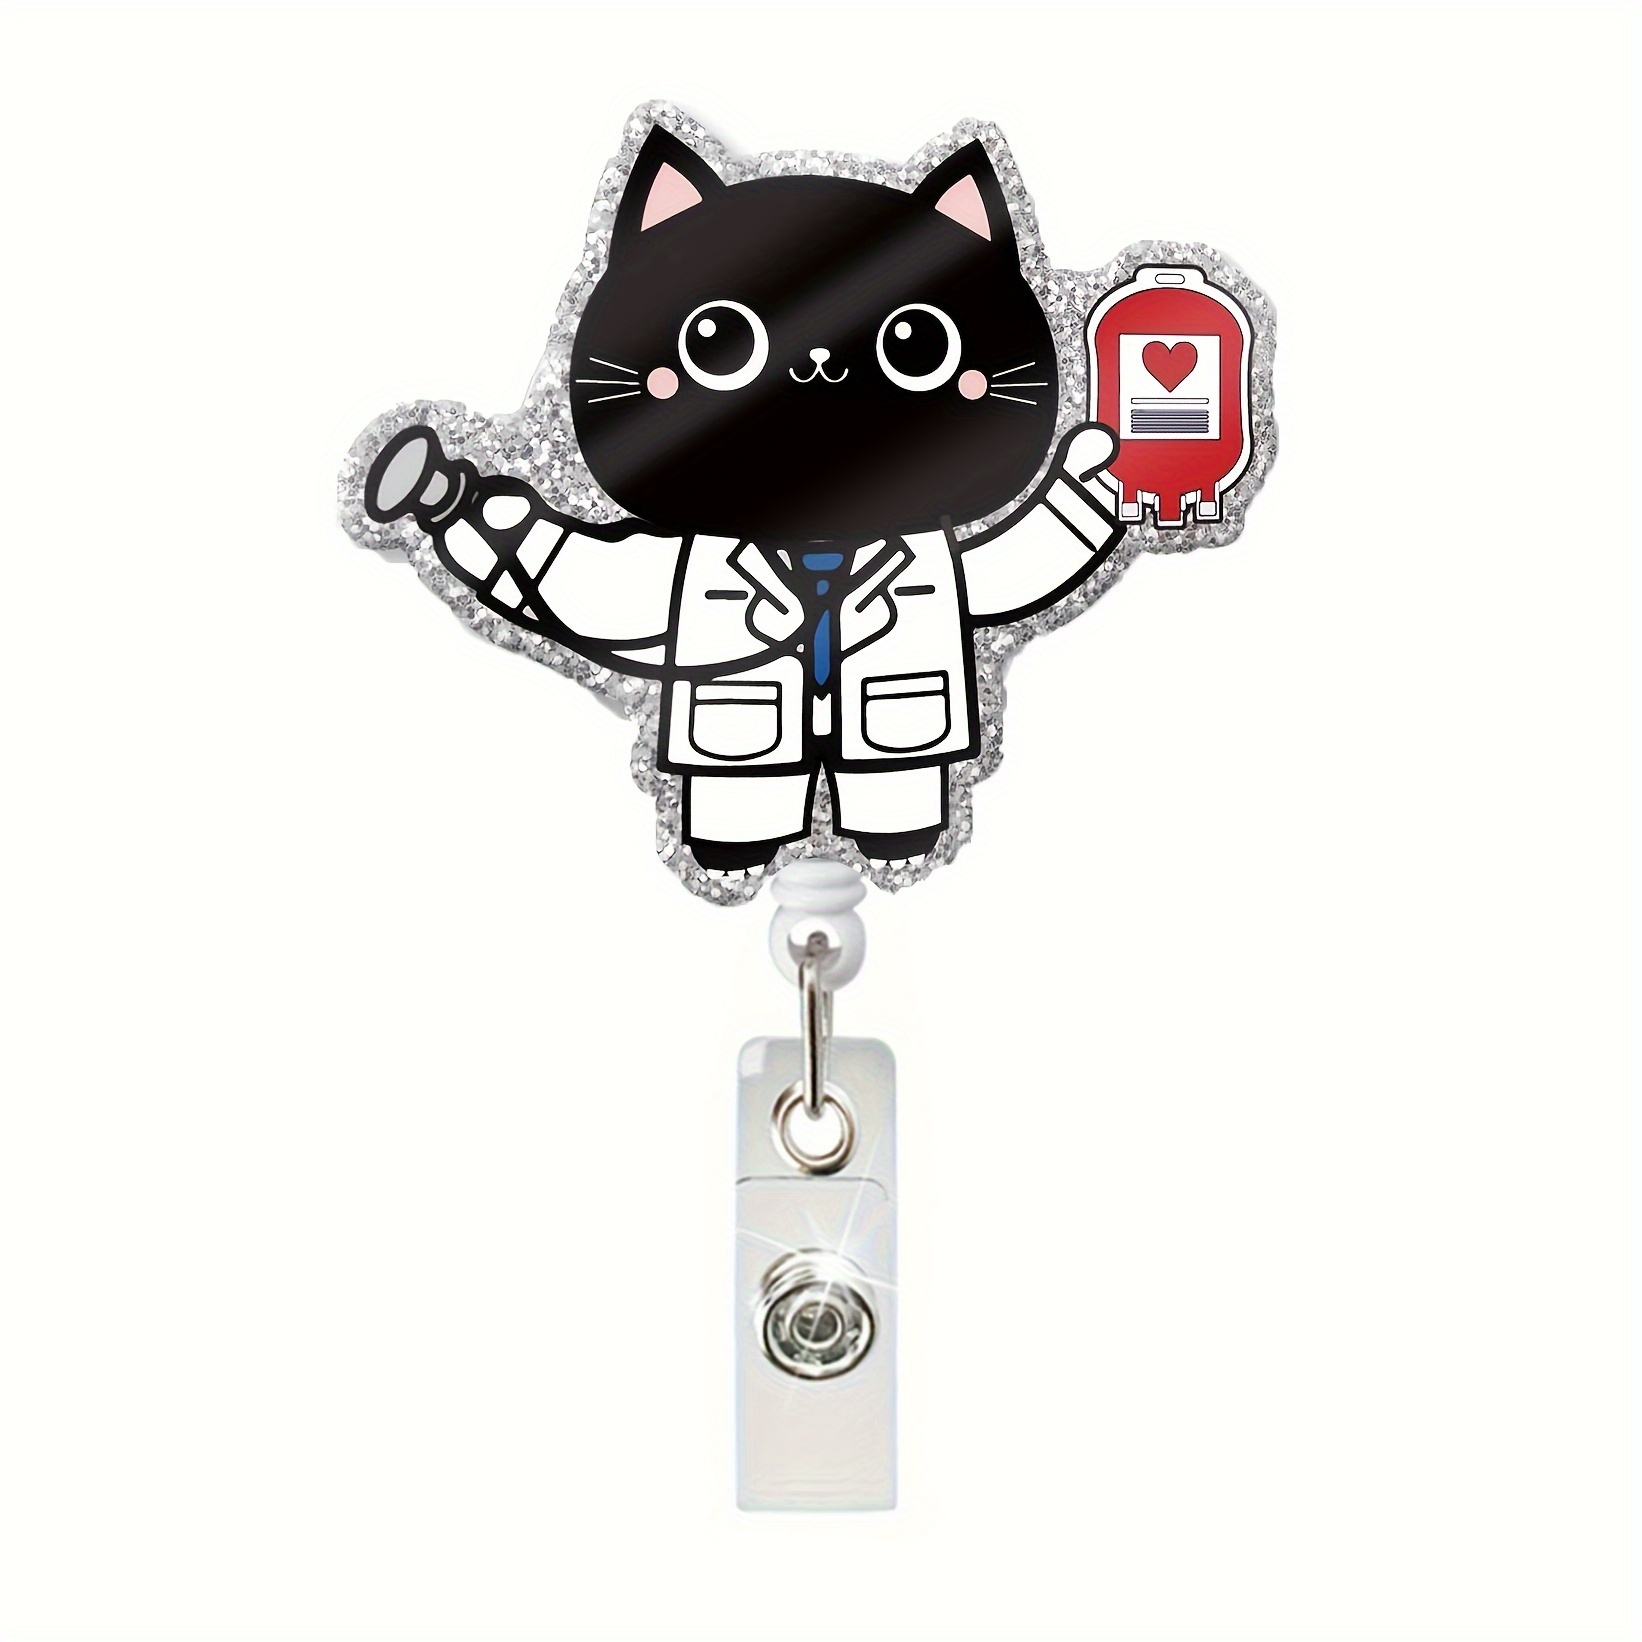 1pc Retractable Cat Scan Badge Reel with Clip Funny Black Glitter Cat Badge Holder Gift for Doctors Nurses ct Scan Technologist ct Tech Radiologist